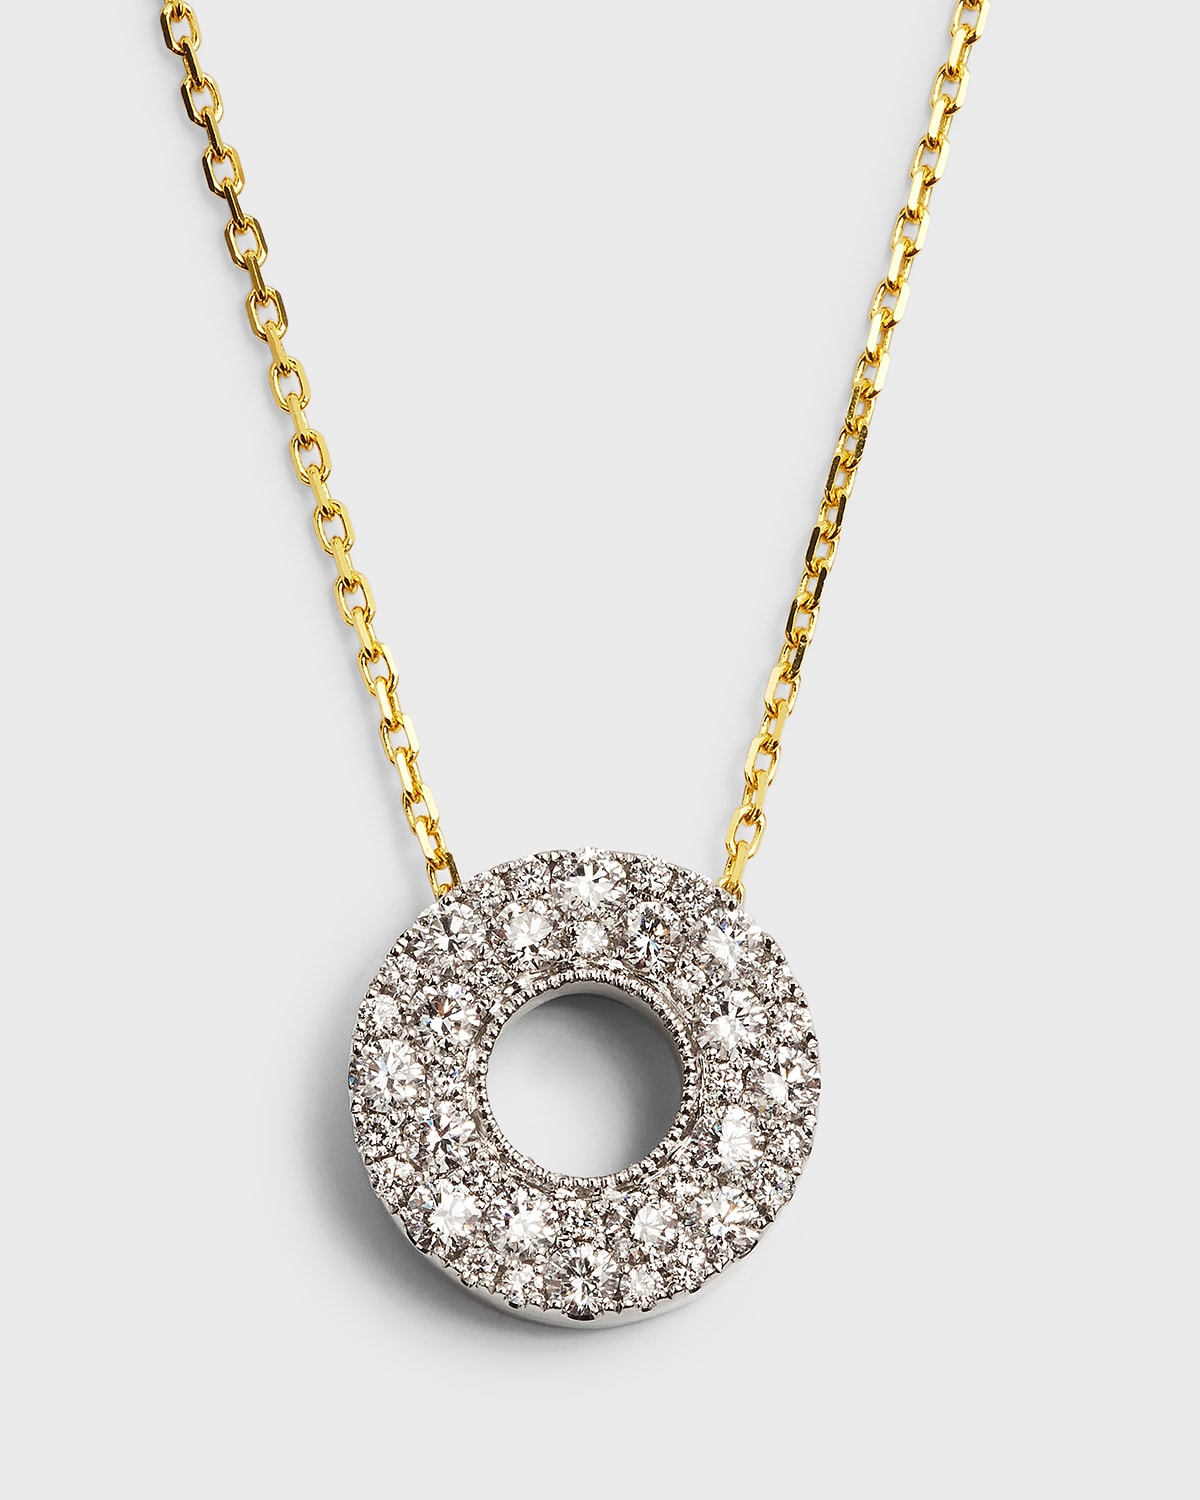 Frederic Sage 18K White Gold All Diamond Nebula Inner Circle Necklace with Yellow Gold Chain